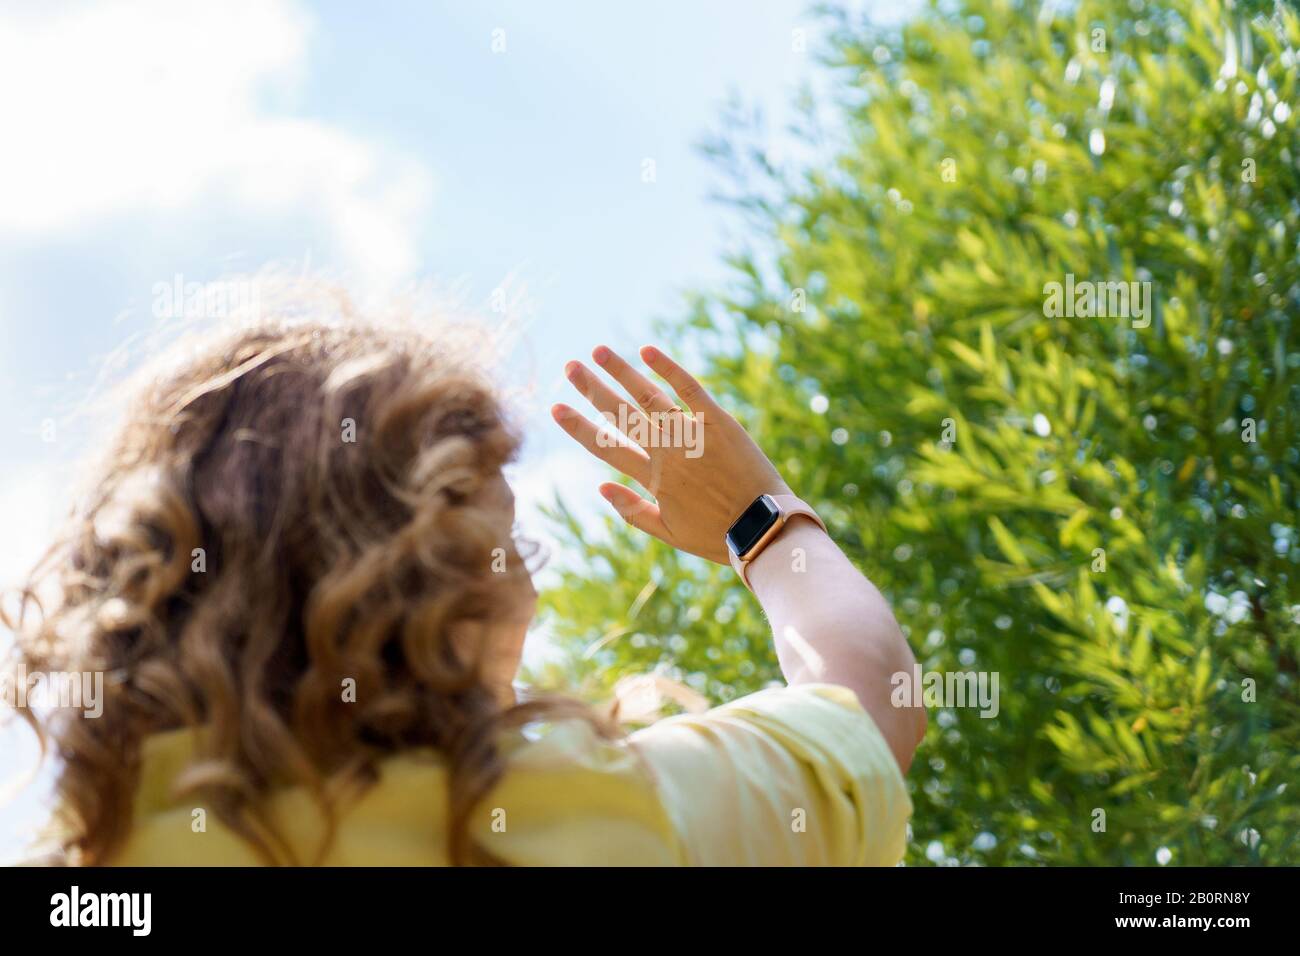 A young woman with red hair in yellow shirt lifted hand with watch up standing her back in summer day against tree in background Stock Photo